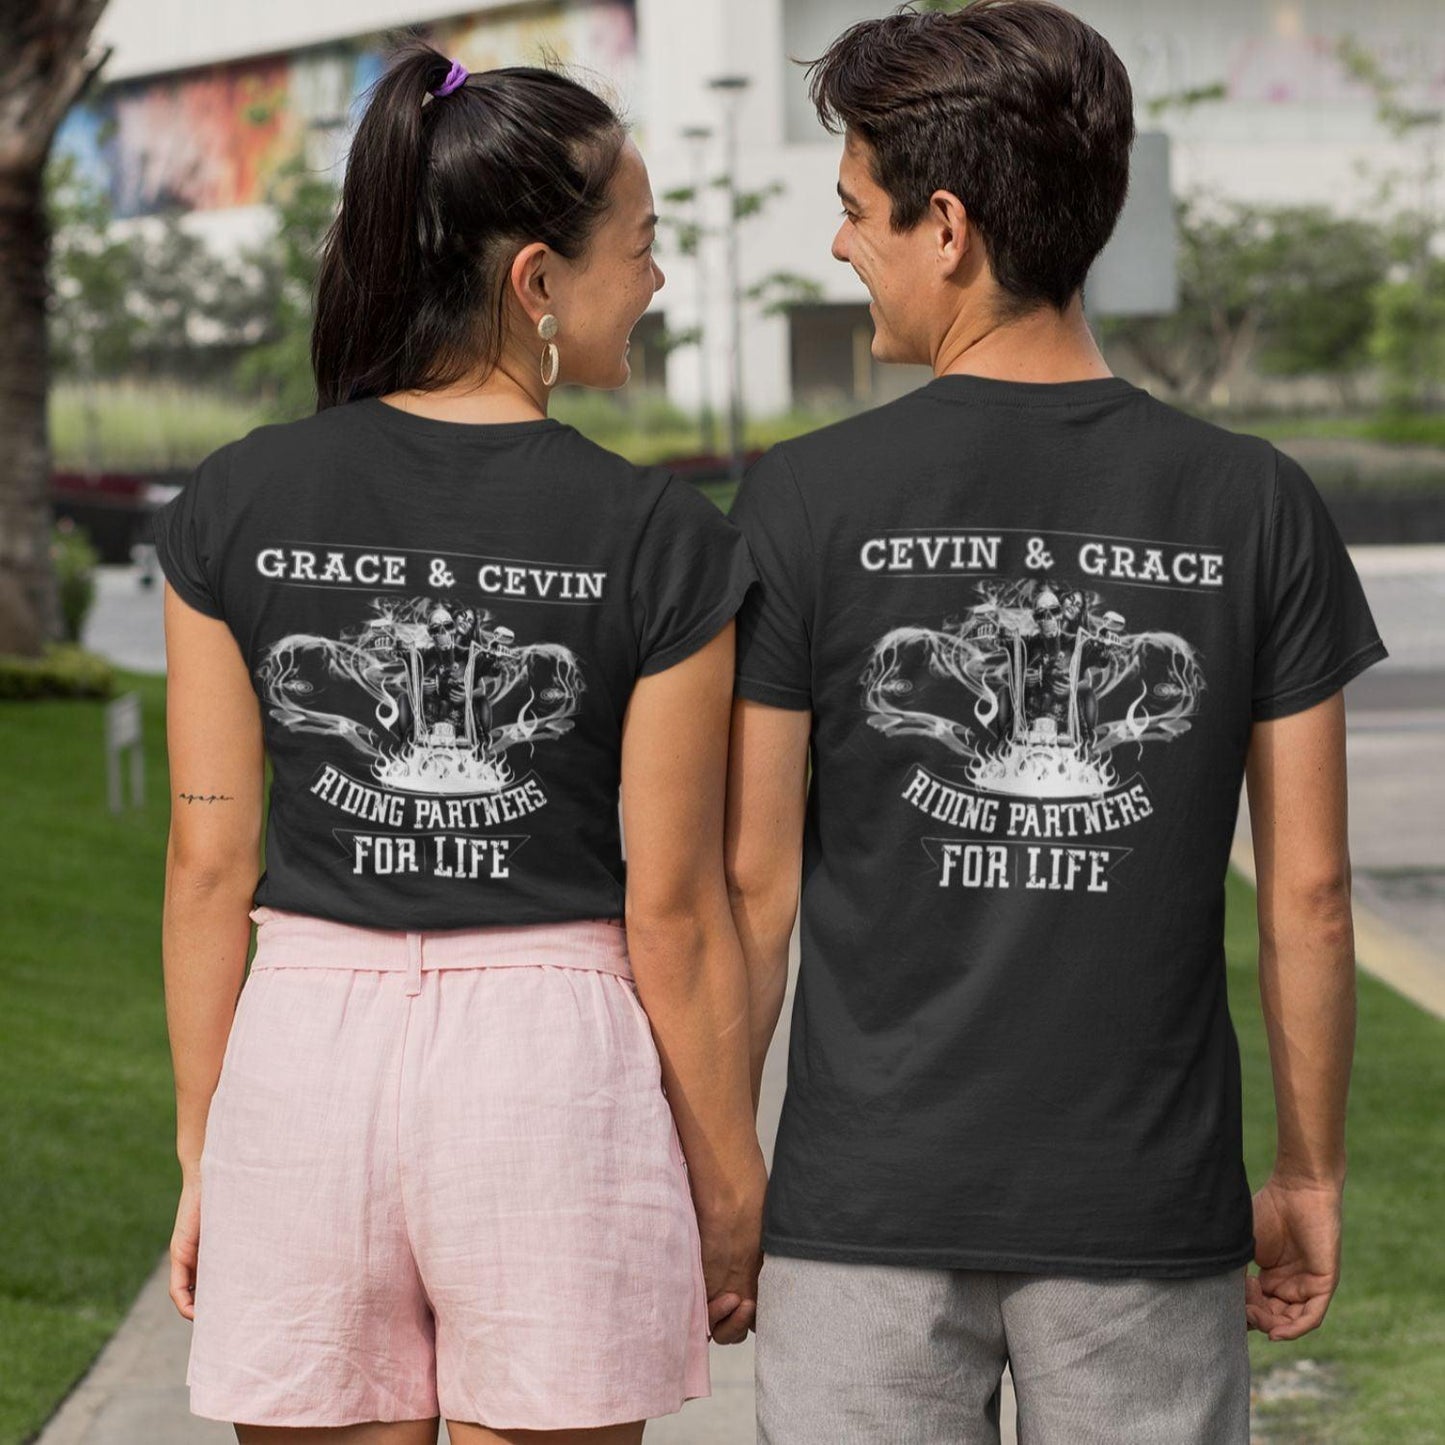 Bonnie & Clyde Riding Partners For Life - Custom Matching Set, Personalized Couple Gifts, Names Included - 4Lovebirds